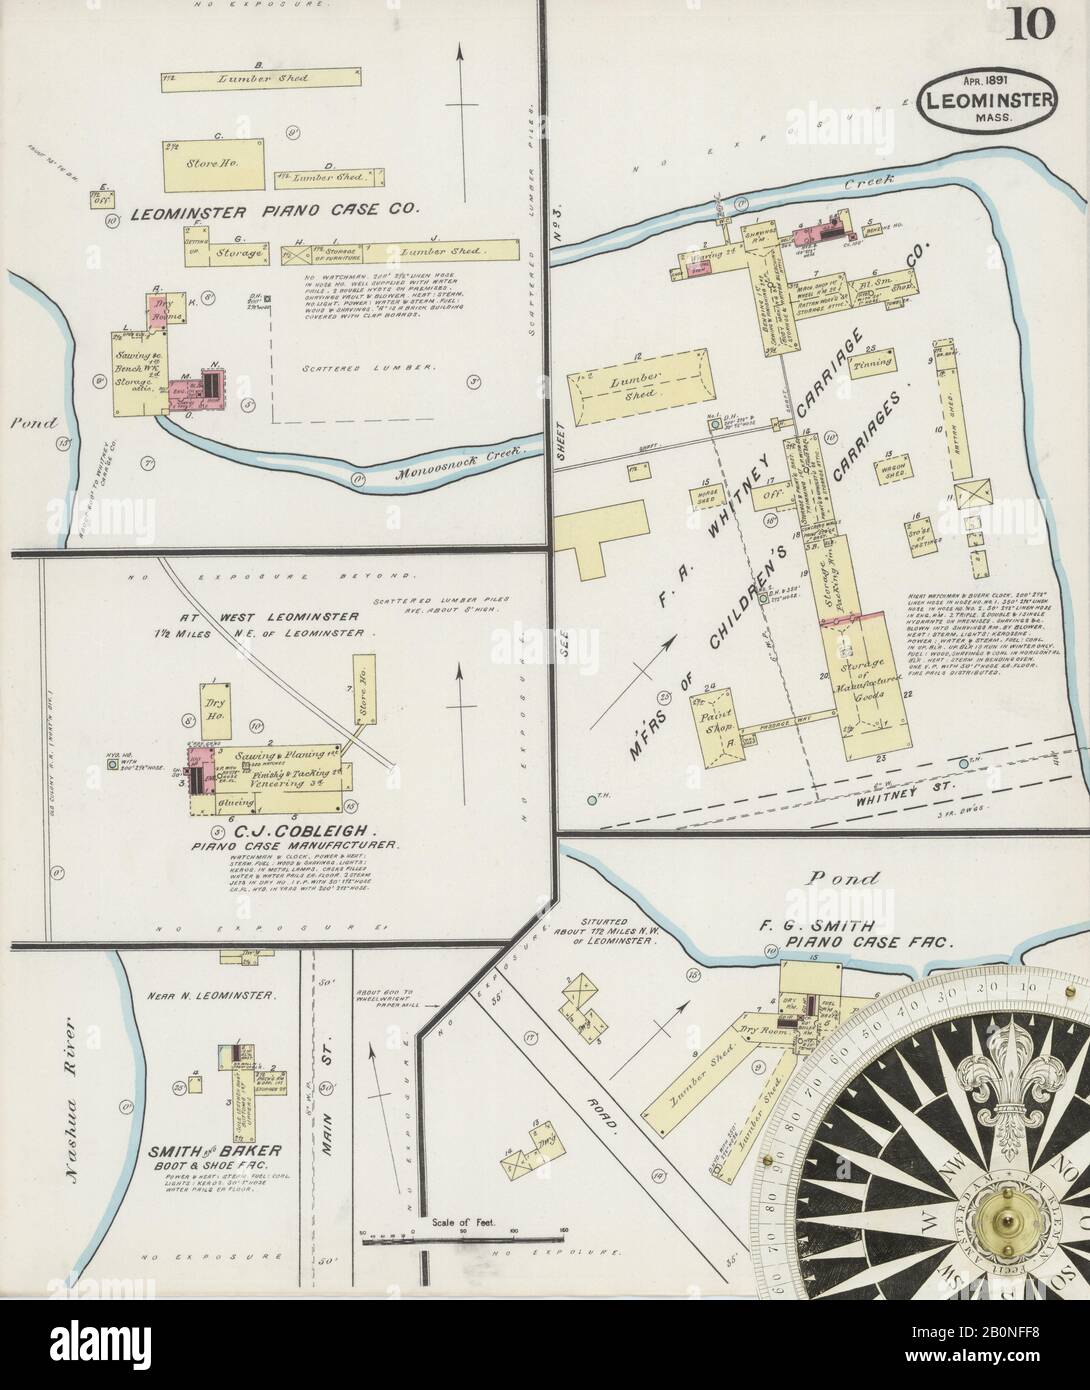 Image 10 of Sanborn Fire Insurance Map from Leominster, Worcester County, Massachusetts. Apr 1891. 10 Sheet(s), America, street map with a Nineteenth Century compass Stock Photo